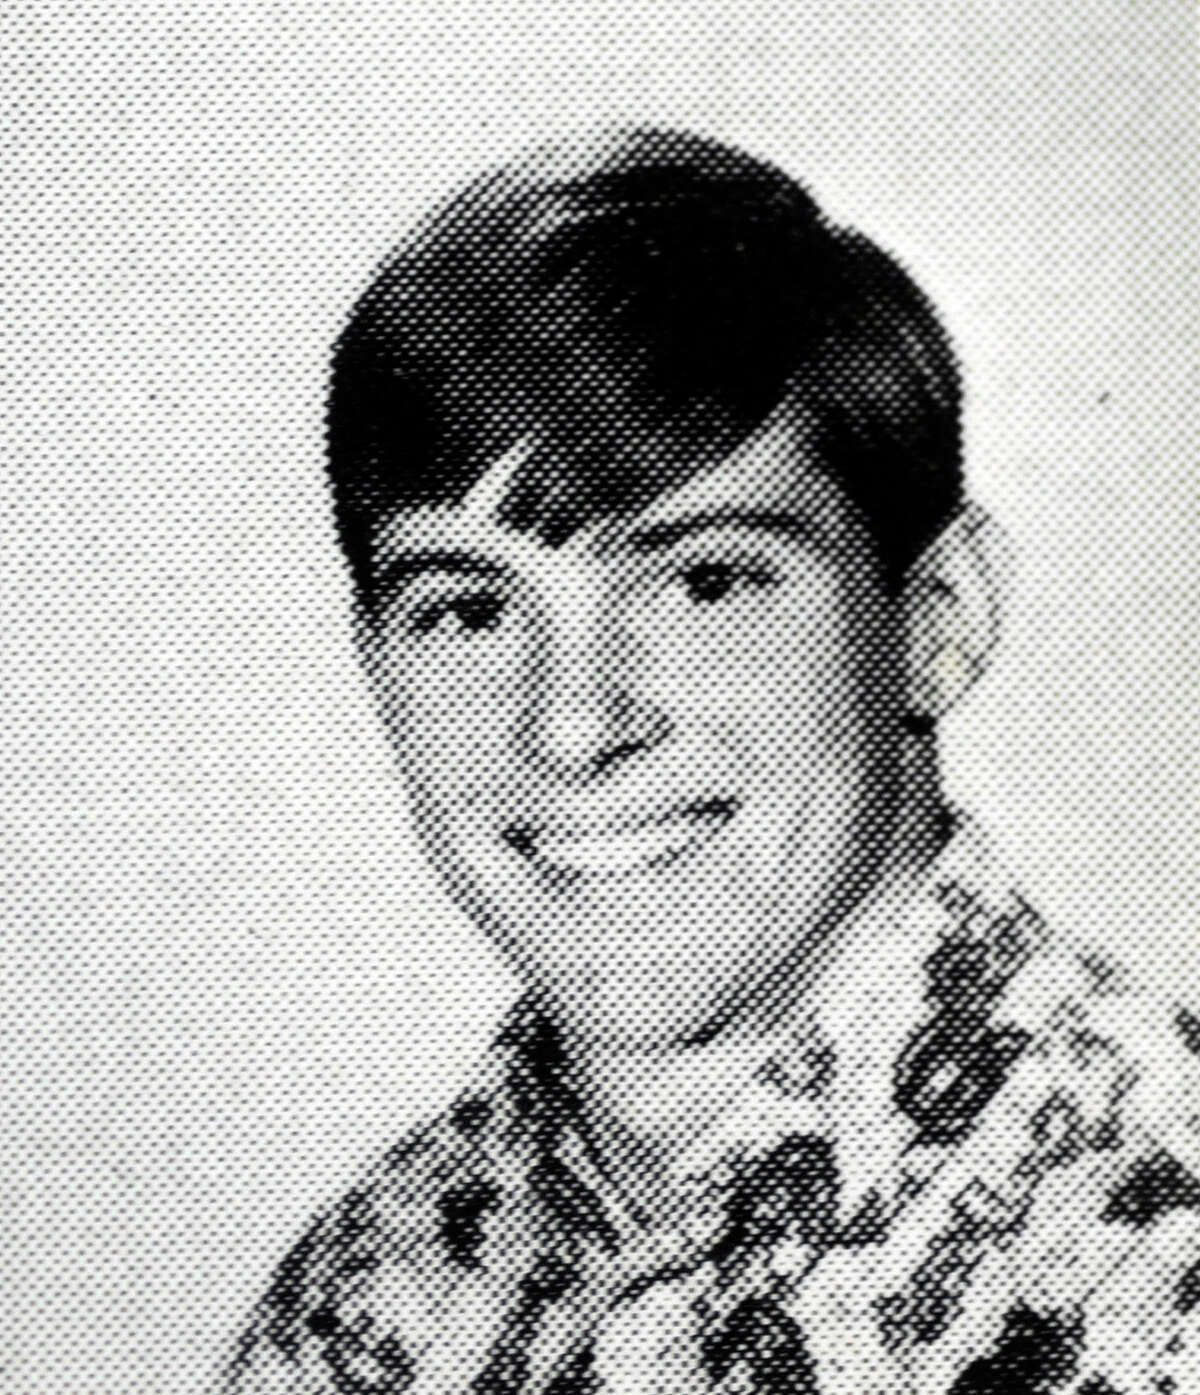 Bruce Jenner is shown in 1967 Newtown High School yearbook photos when he was a junior.